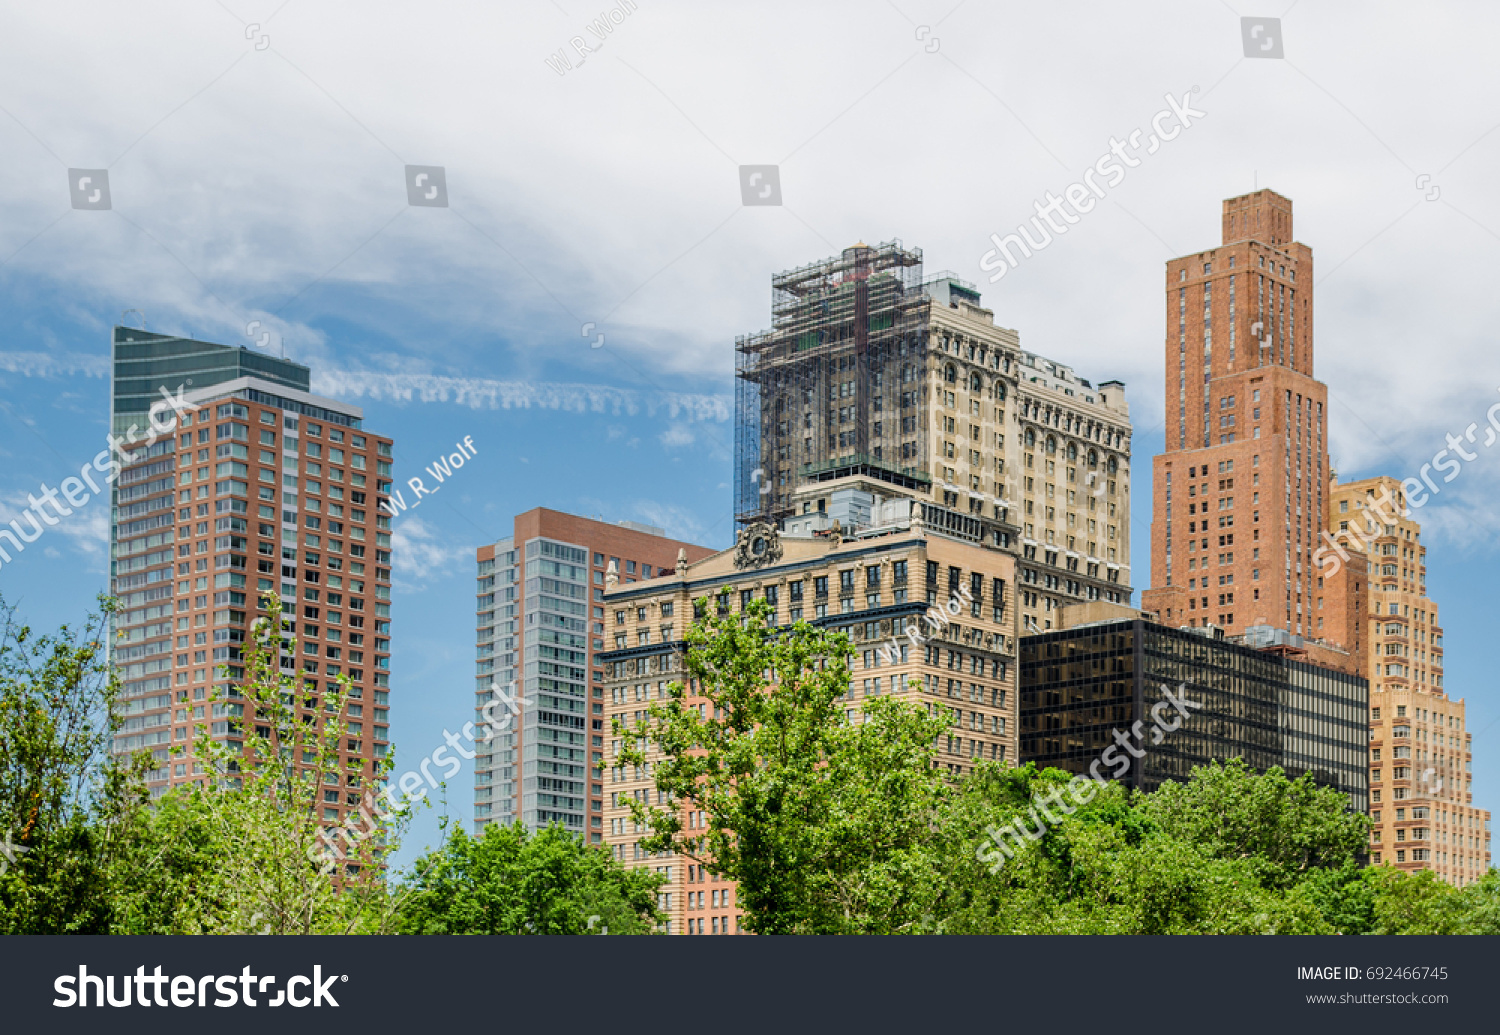 Buildings with blue sky and clouds with summer trees at base. #692466745